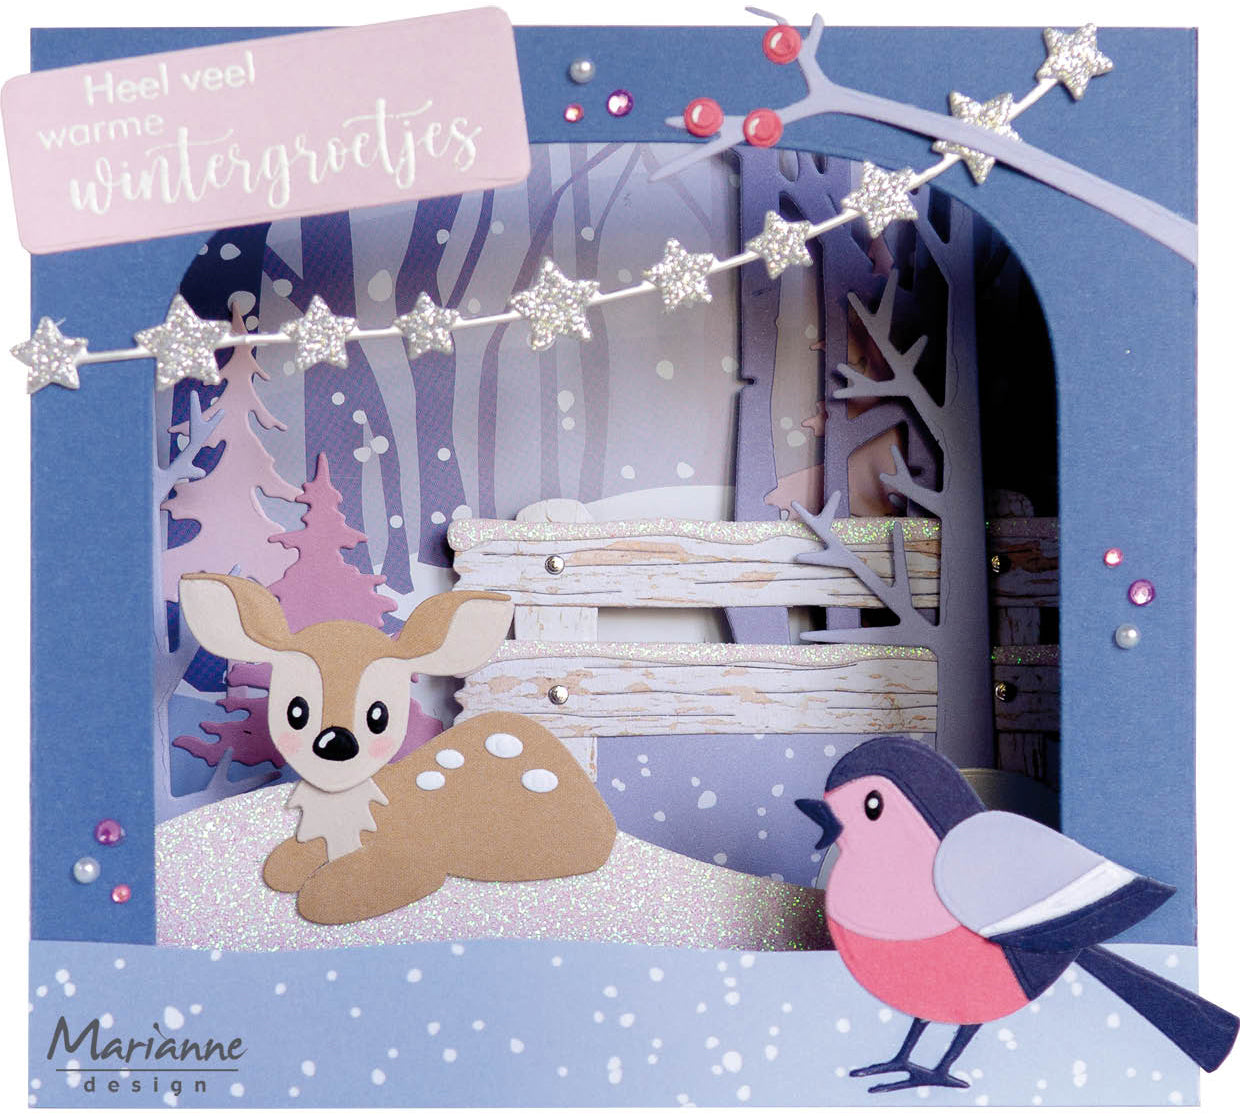 Marianne Design A4 Cutting Sheet - Eline's Winter Dreams Backgrounds